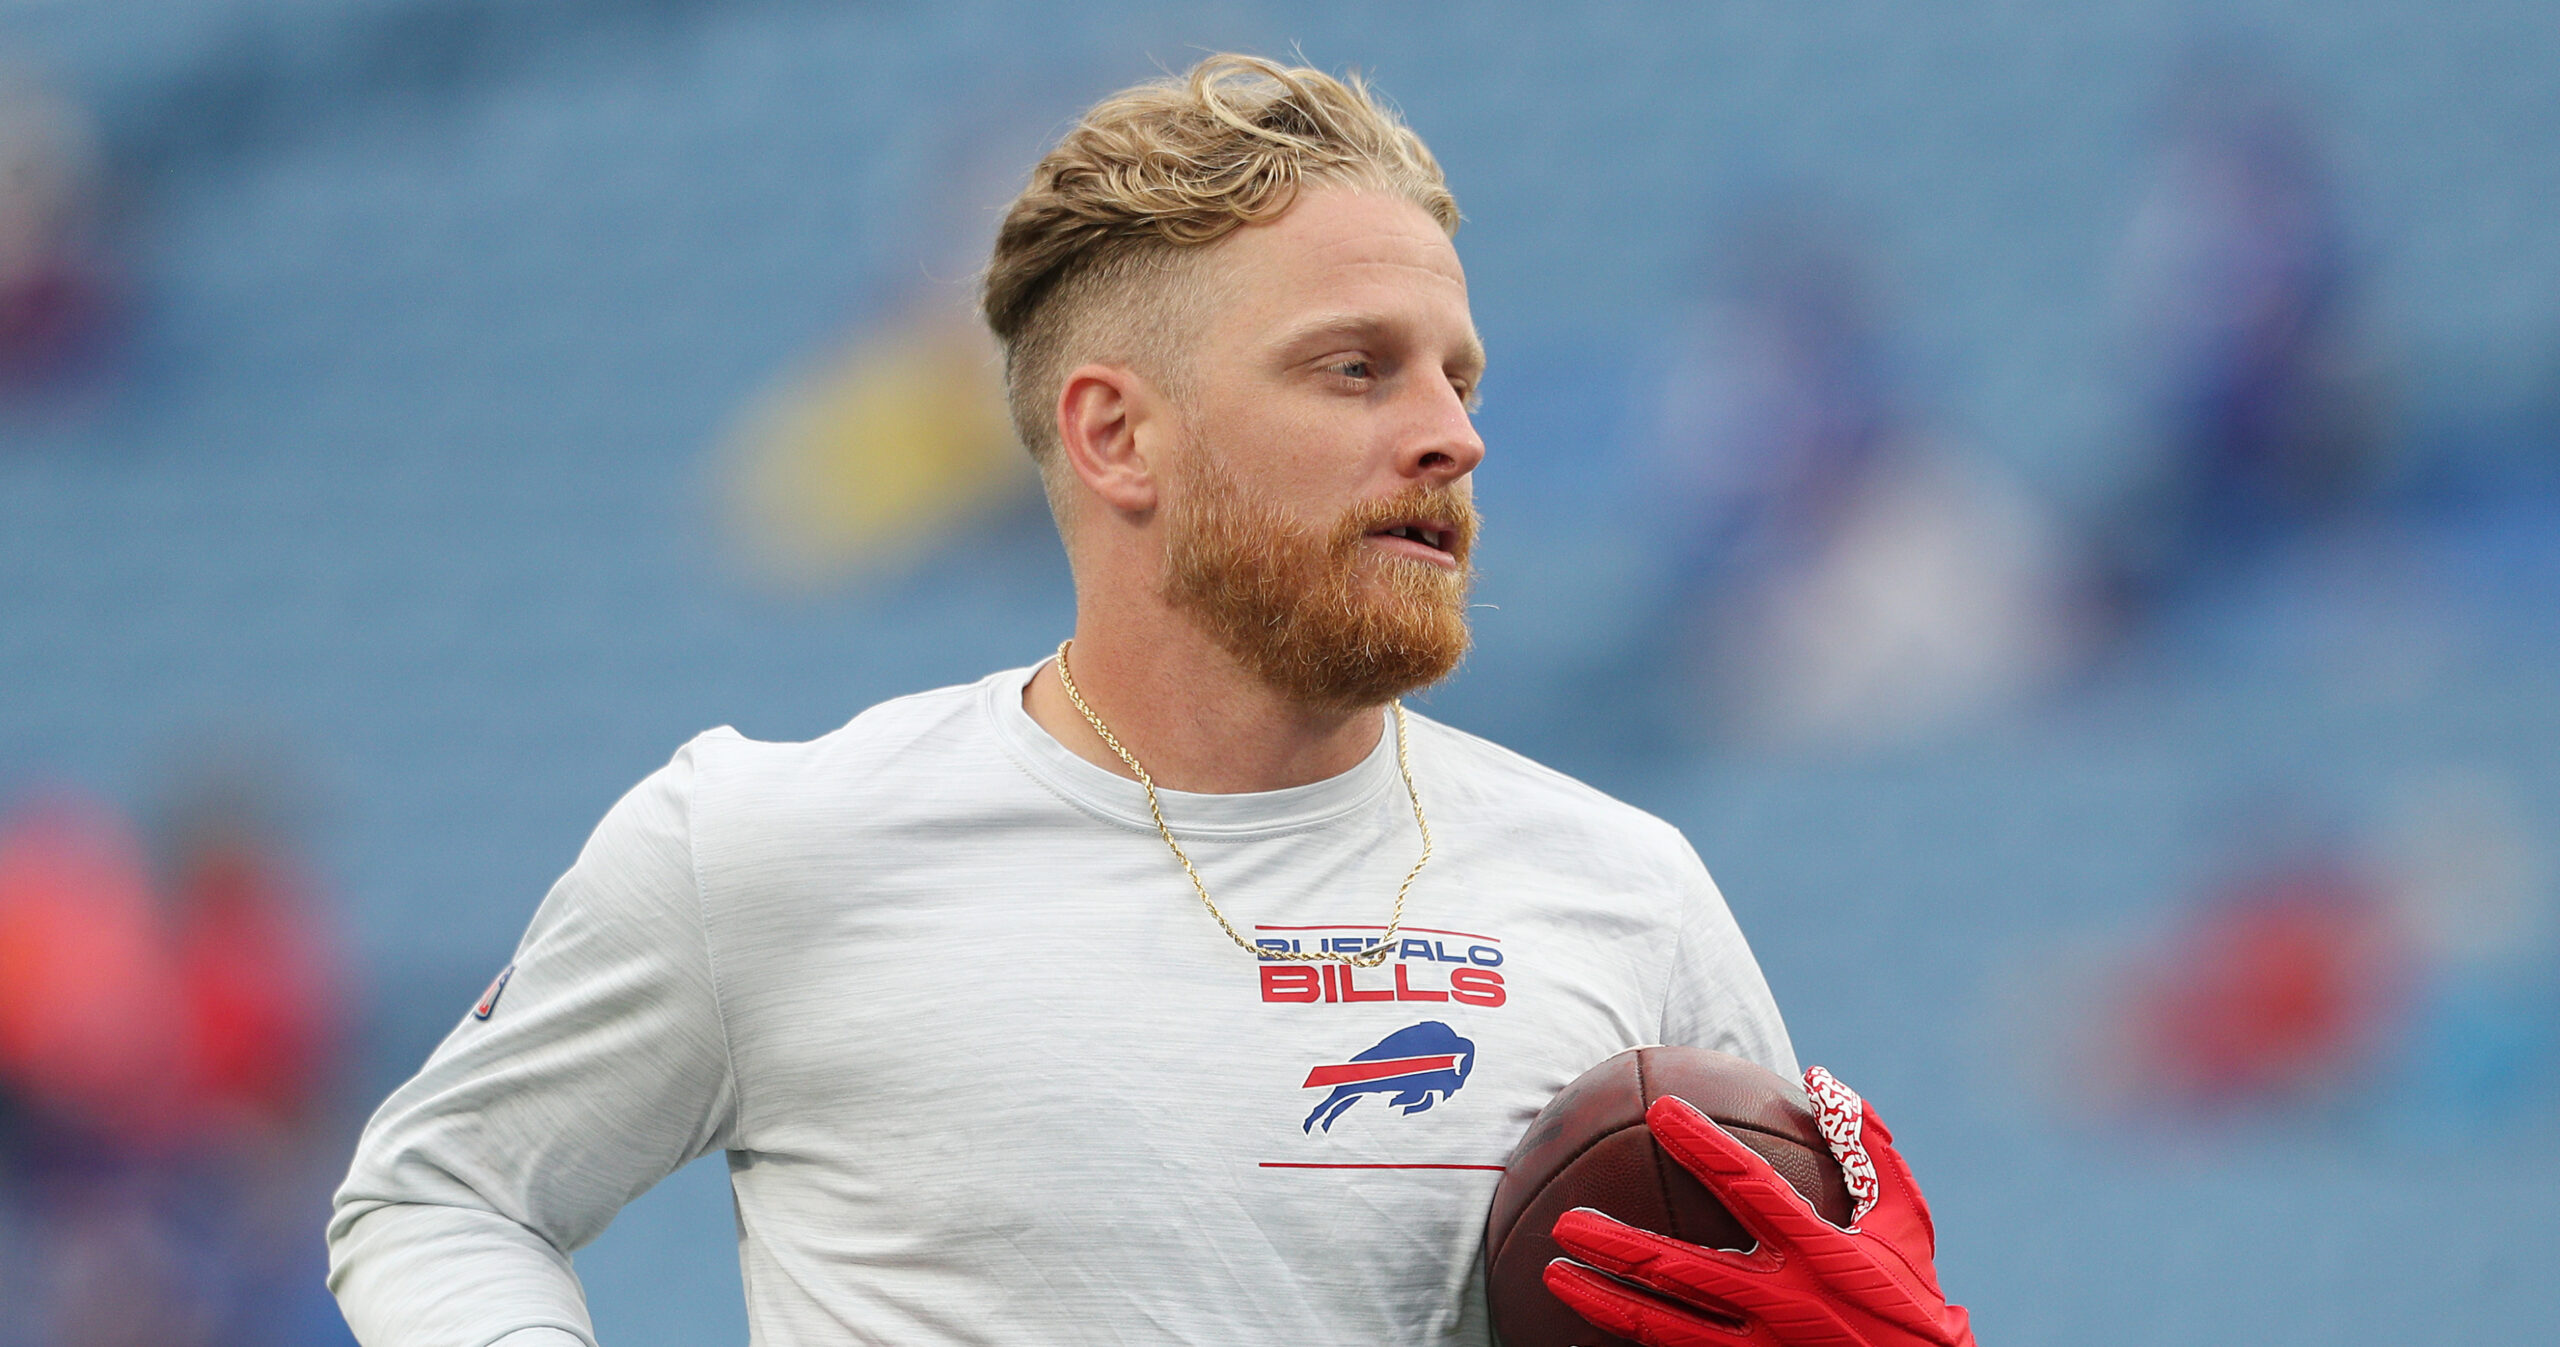 Who Is Football Player Cole Beasley Wife: Kyrstin Beasley? All You Need To Know About Their Marital Life